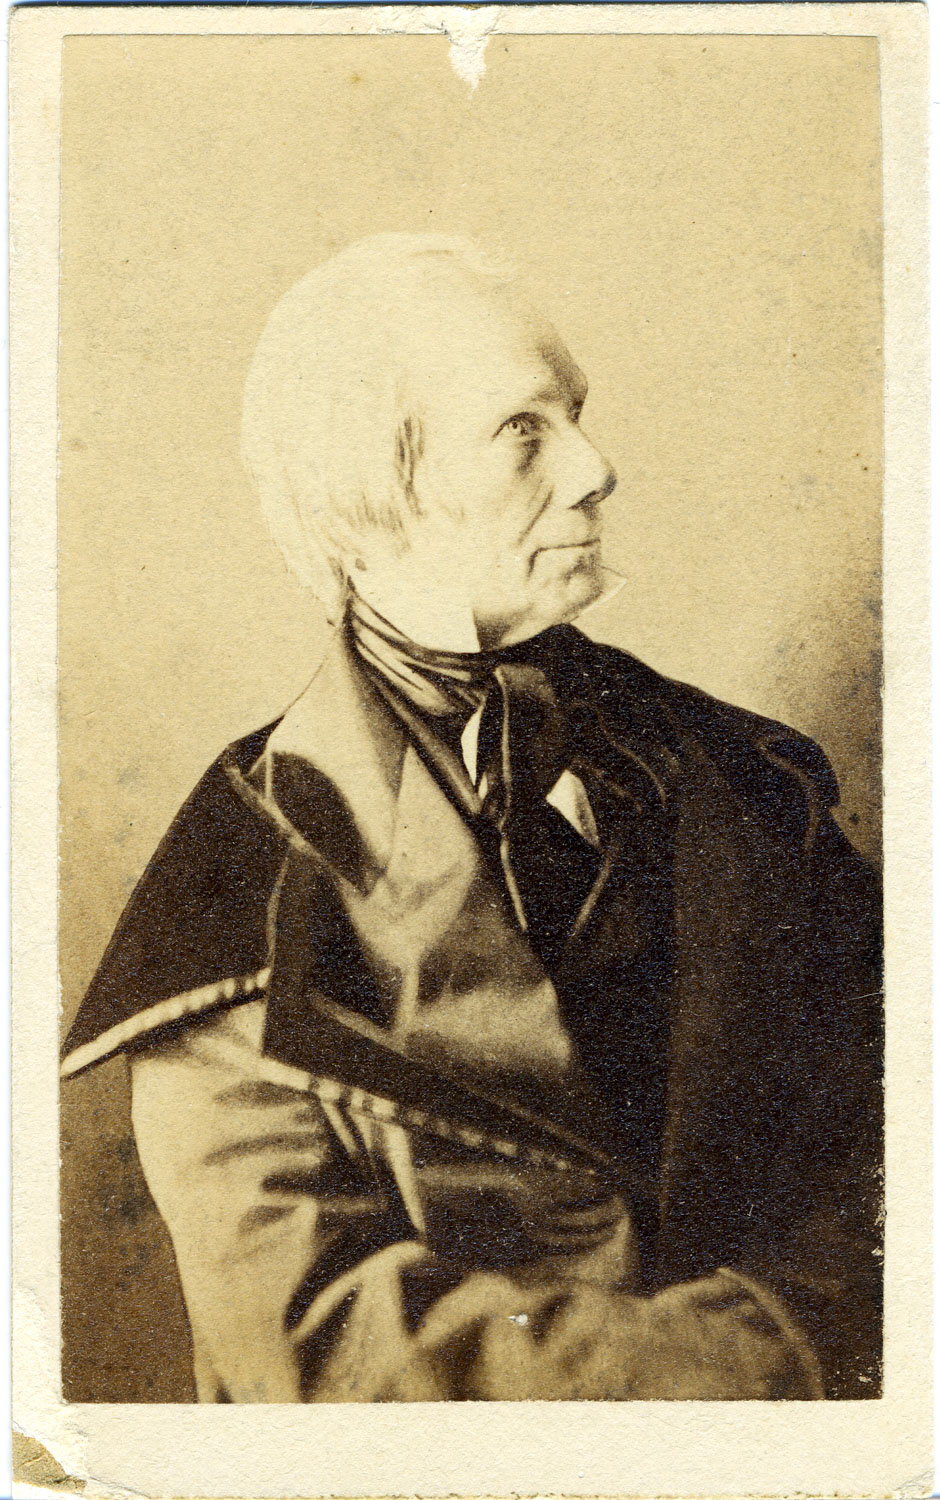 Henry Clay 6 in Later Years